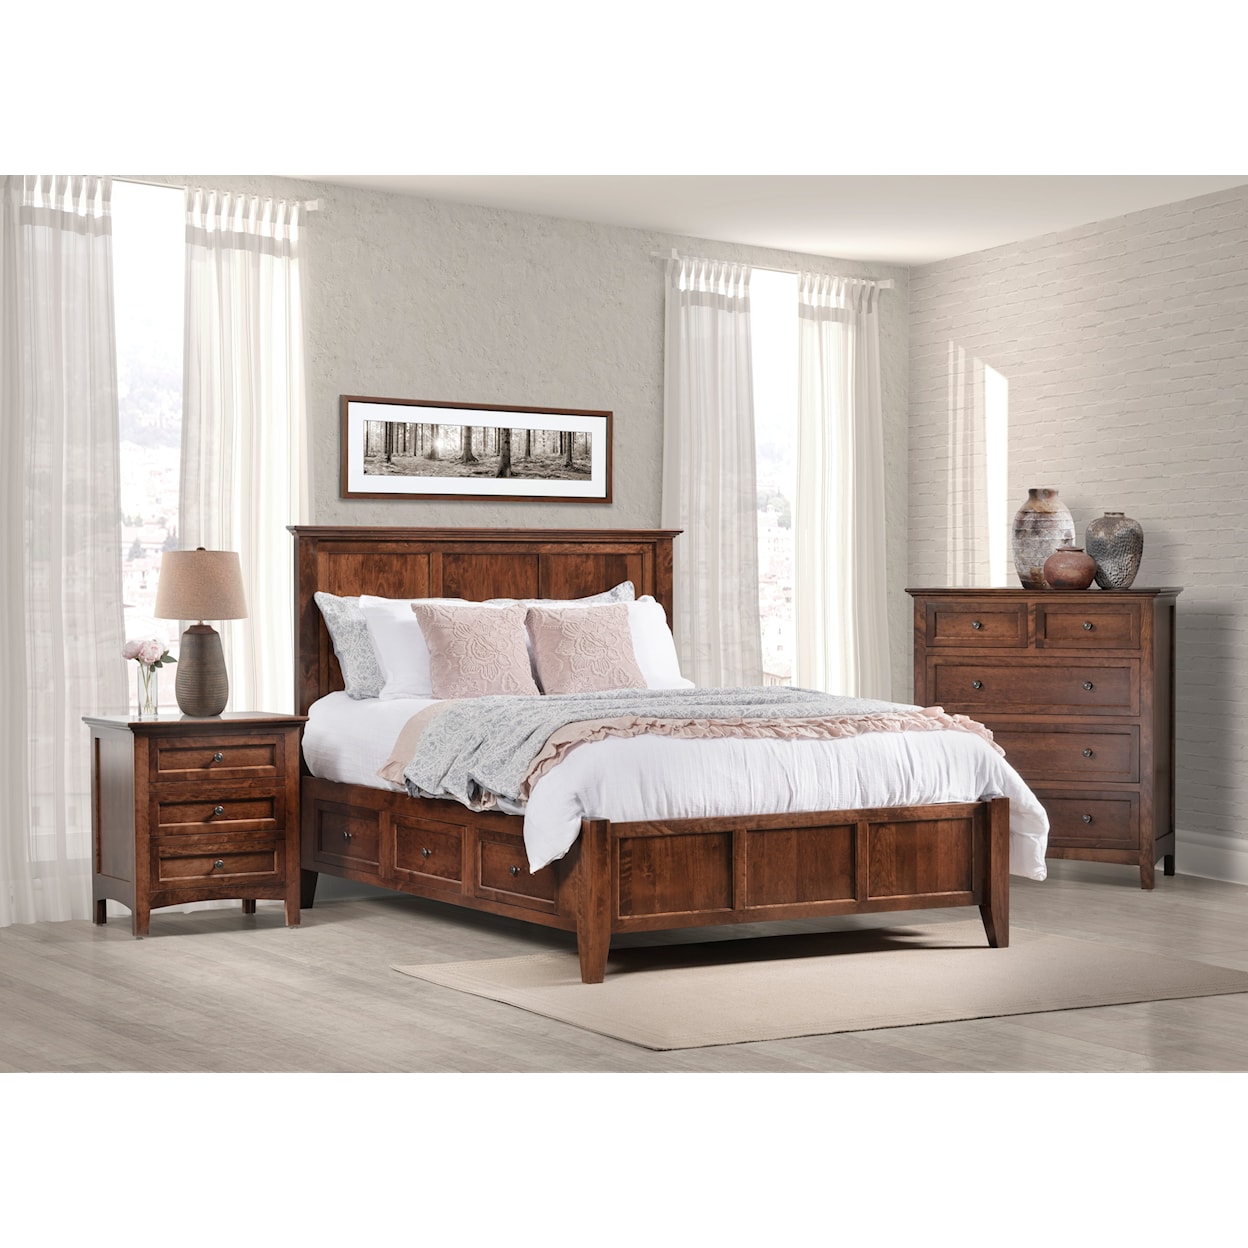 Millcraft Albany 3-Piece King Bedroom Group